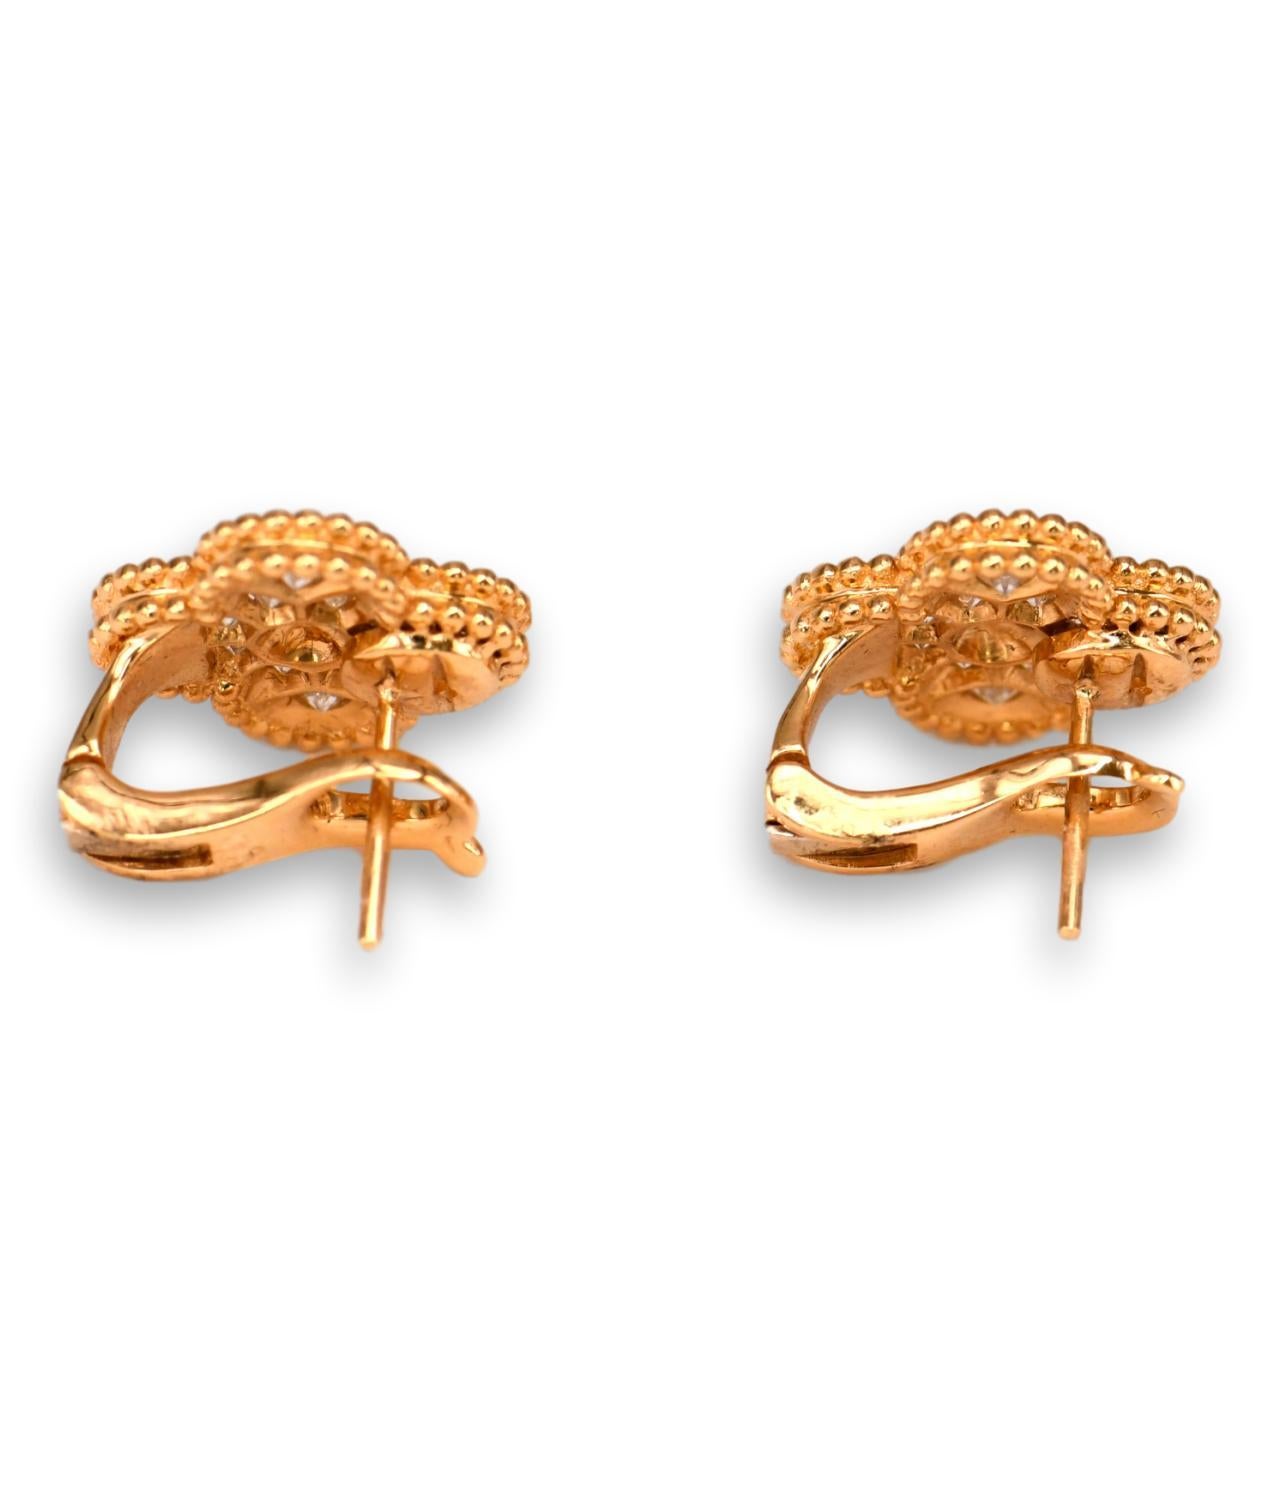 An iconic pair of 18ct yellow gold and diamond Vintage Alhambra ear clips from the House of Van Cleef & Arpels. Two rich yellow gold quatrefoil clover shapes have been expertly set with 1.02ct of sparkling colourless (DEF) brilliants and defined by